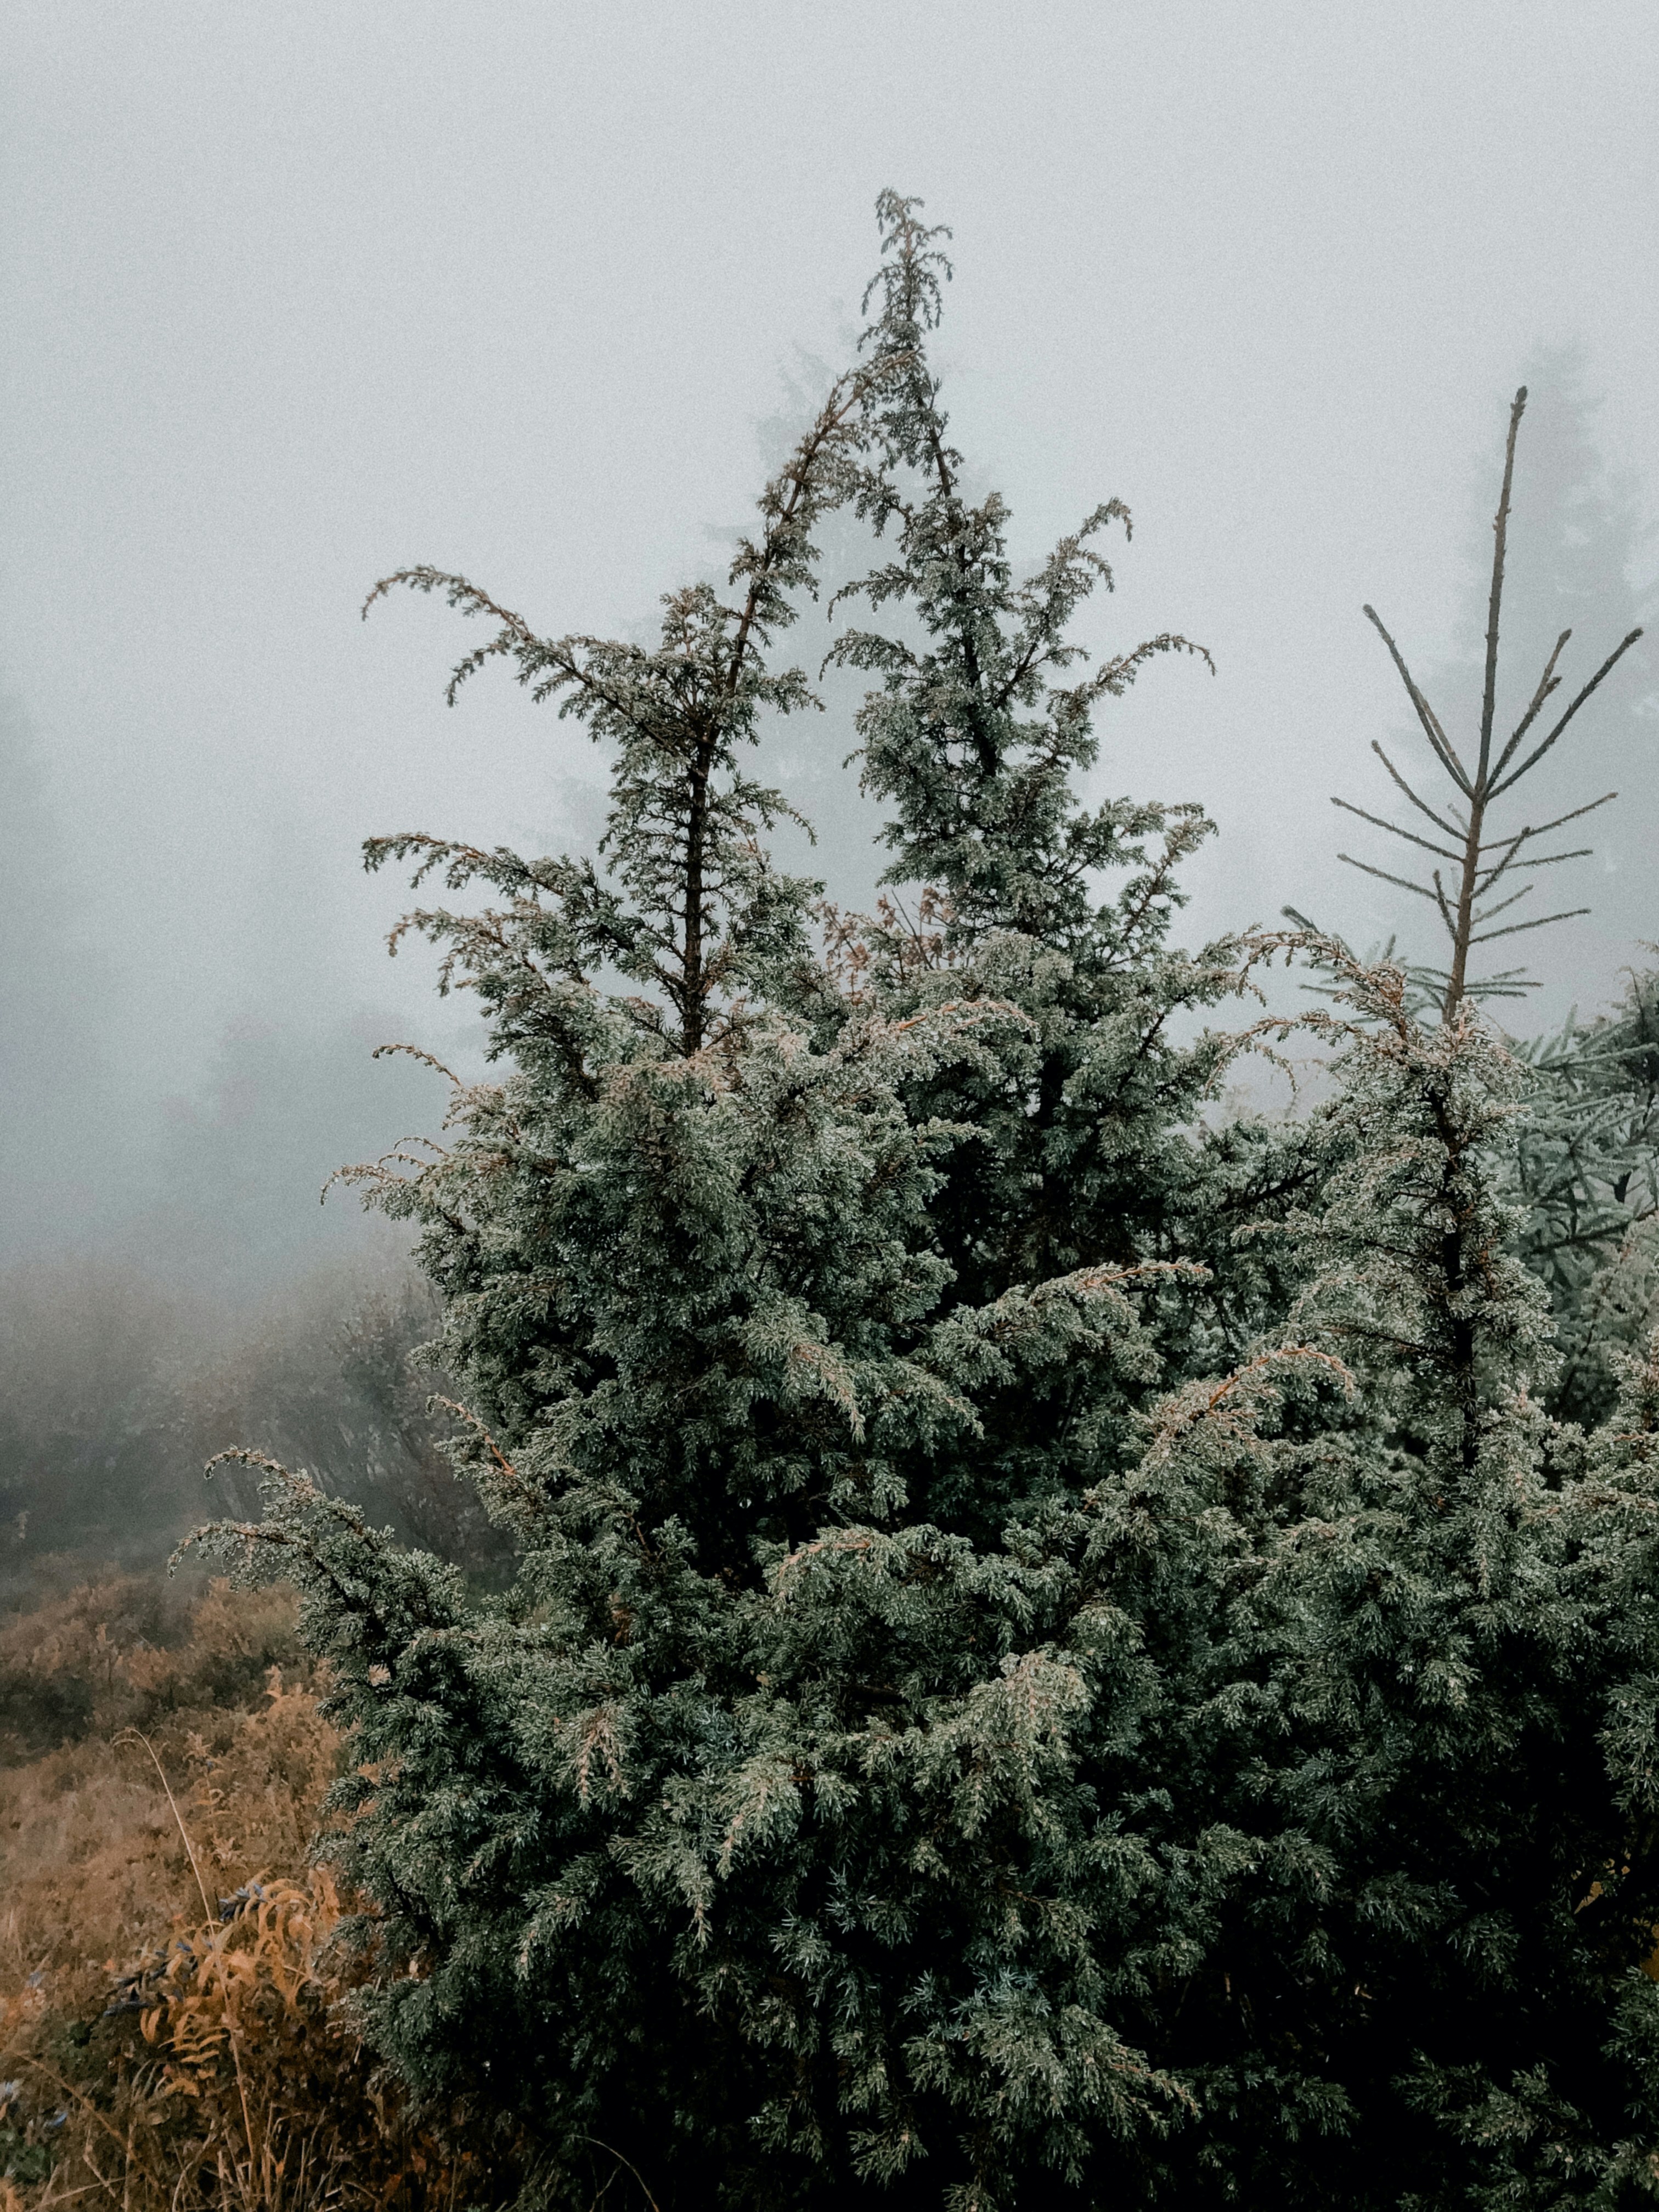 Fog in Carpathians mountains with fir-tree